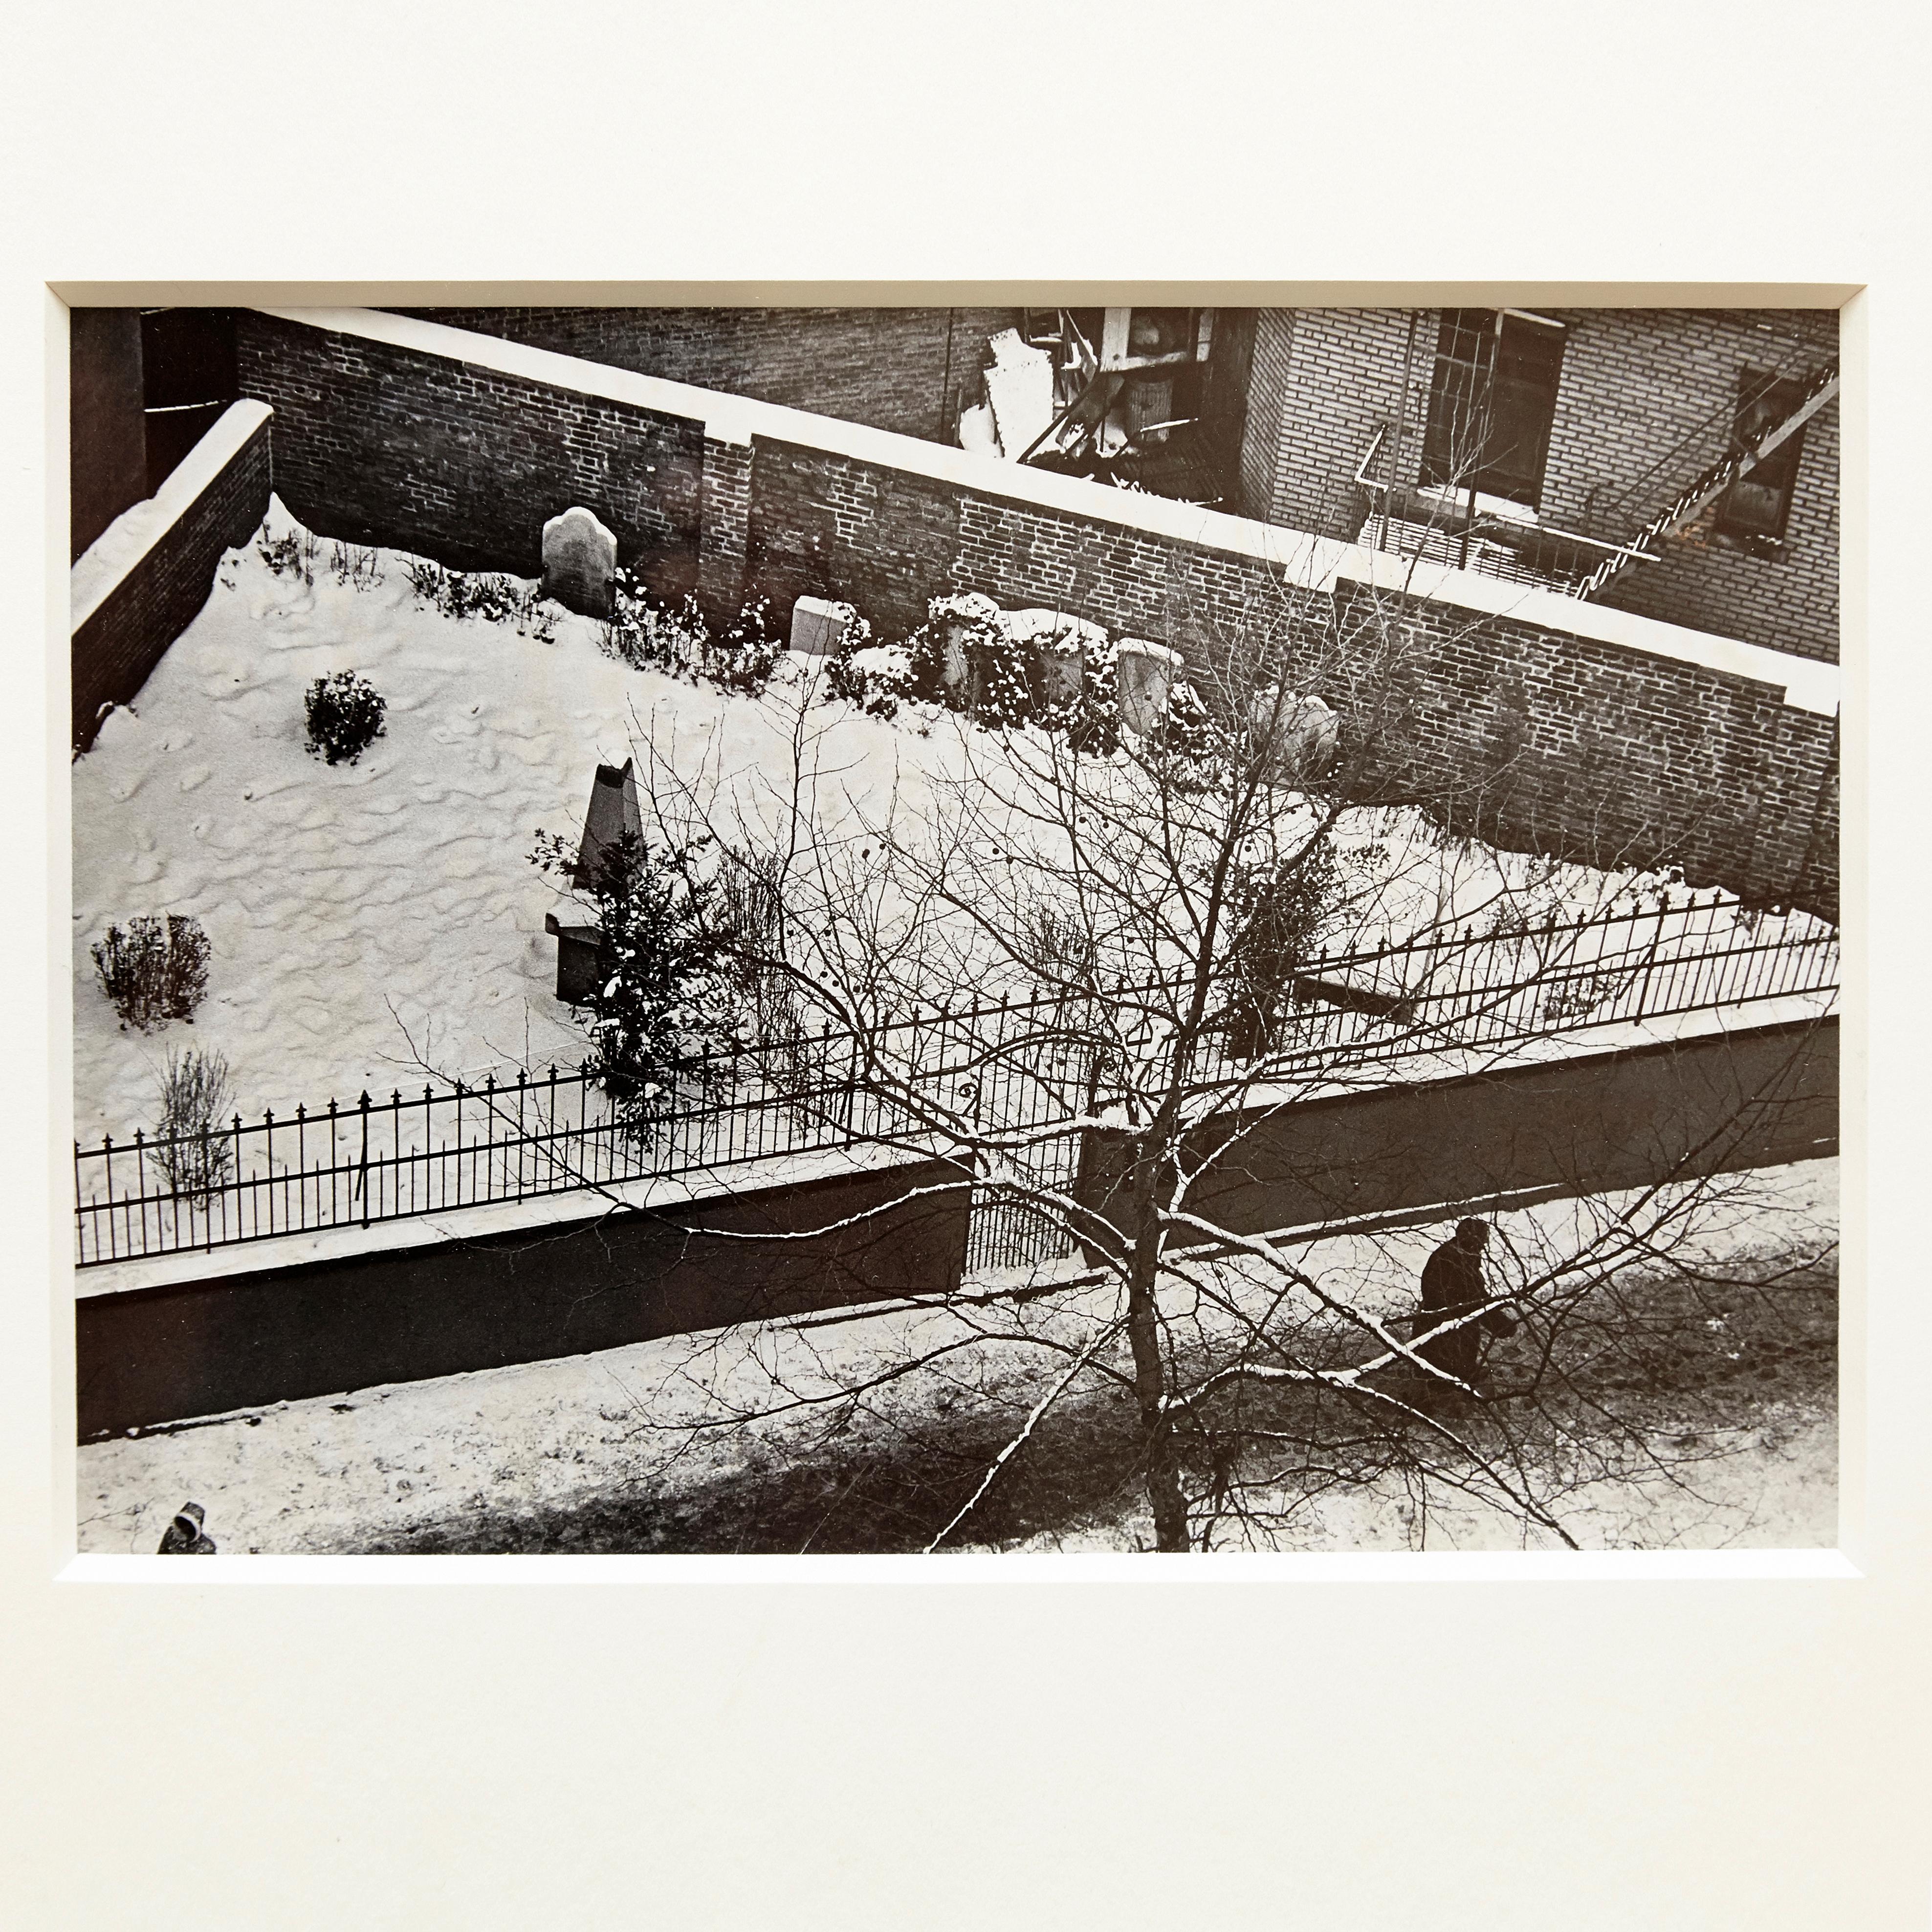 Andre Kerstesz Photography

30 x 22 whitout frame
47,5 x 41 x 3 cm Framed

André Kertész (1894 -1985)
Kertesz as a Hungarian-born photographer distinguished by haunting composition in his photographs and by his early efforts in developing the photo